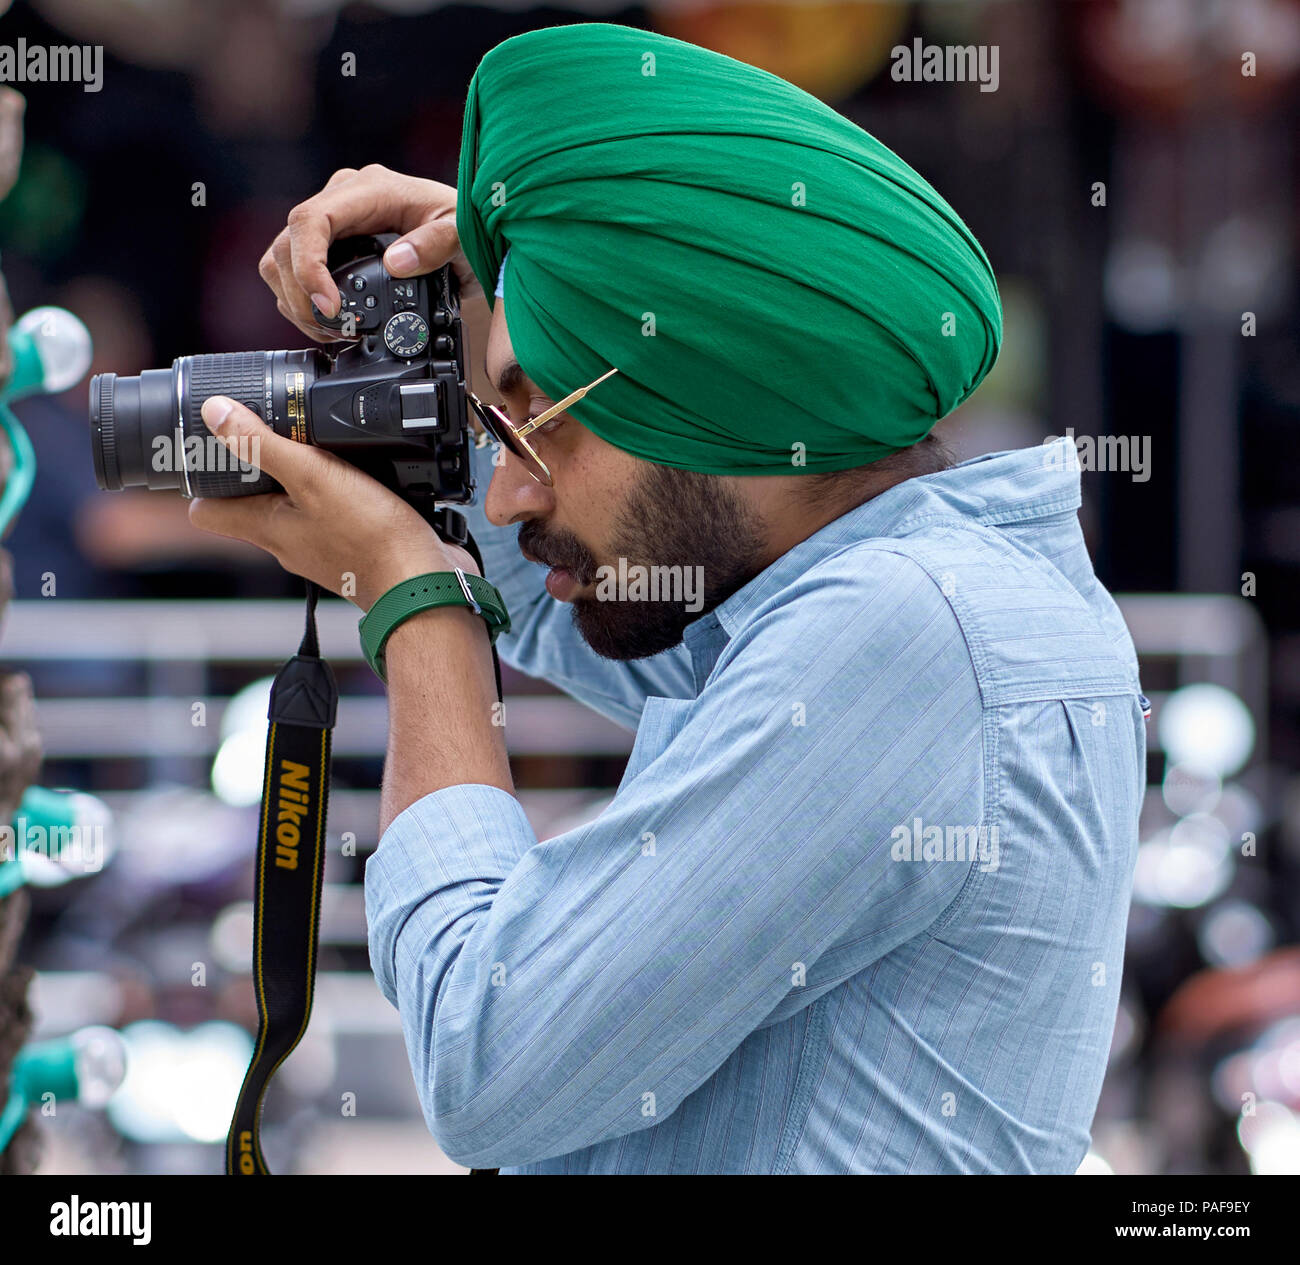 Indian Sikh man taking a photograph Stock Photo